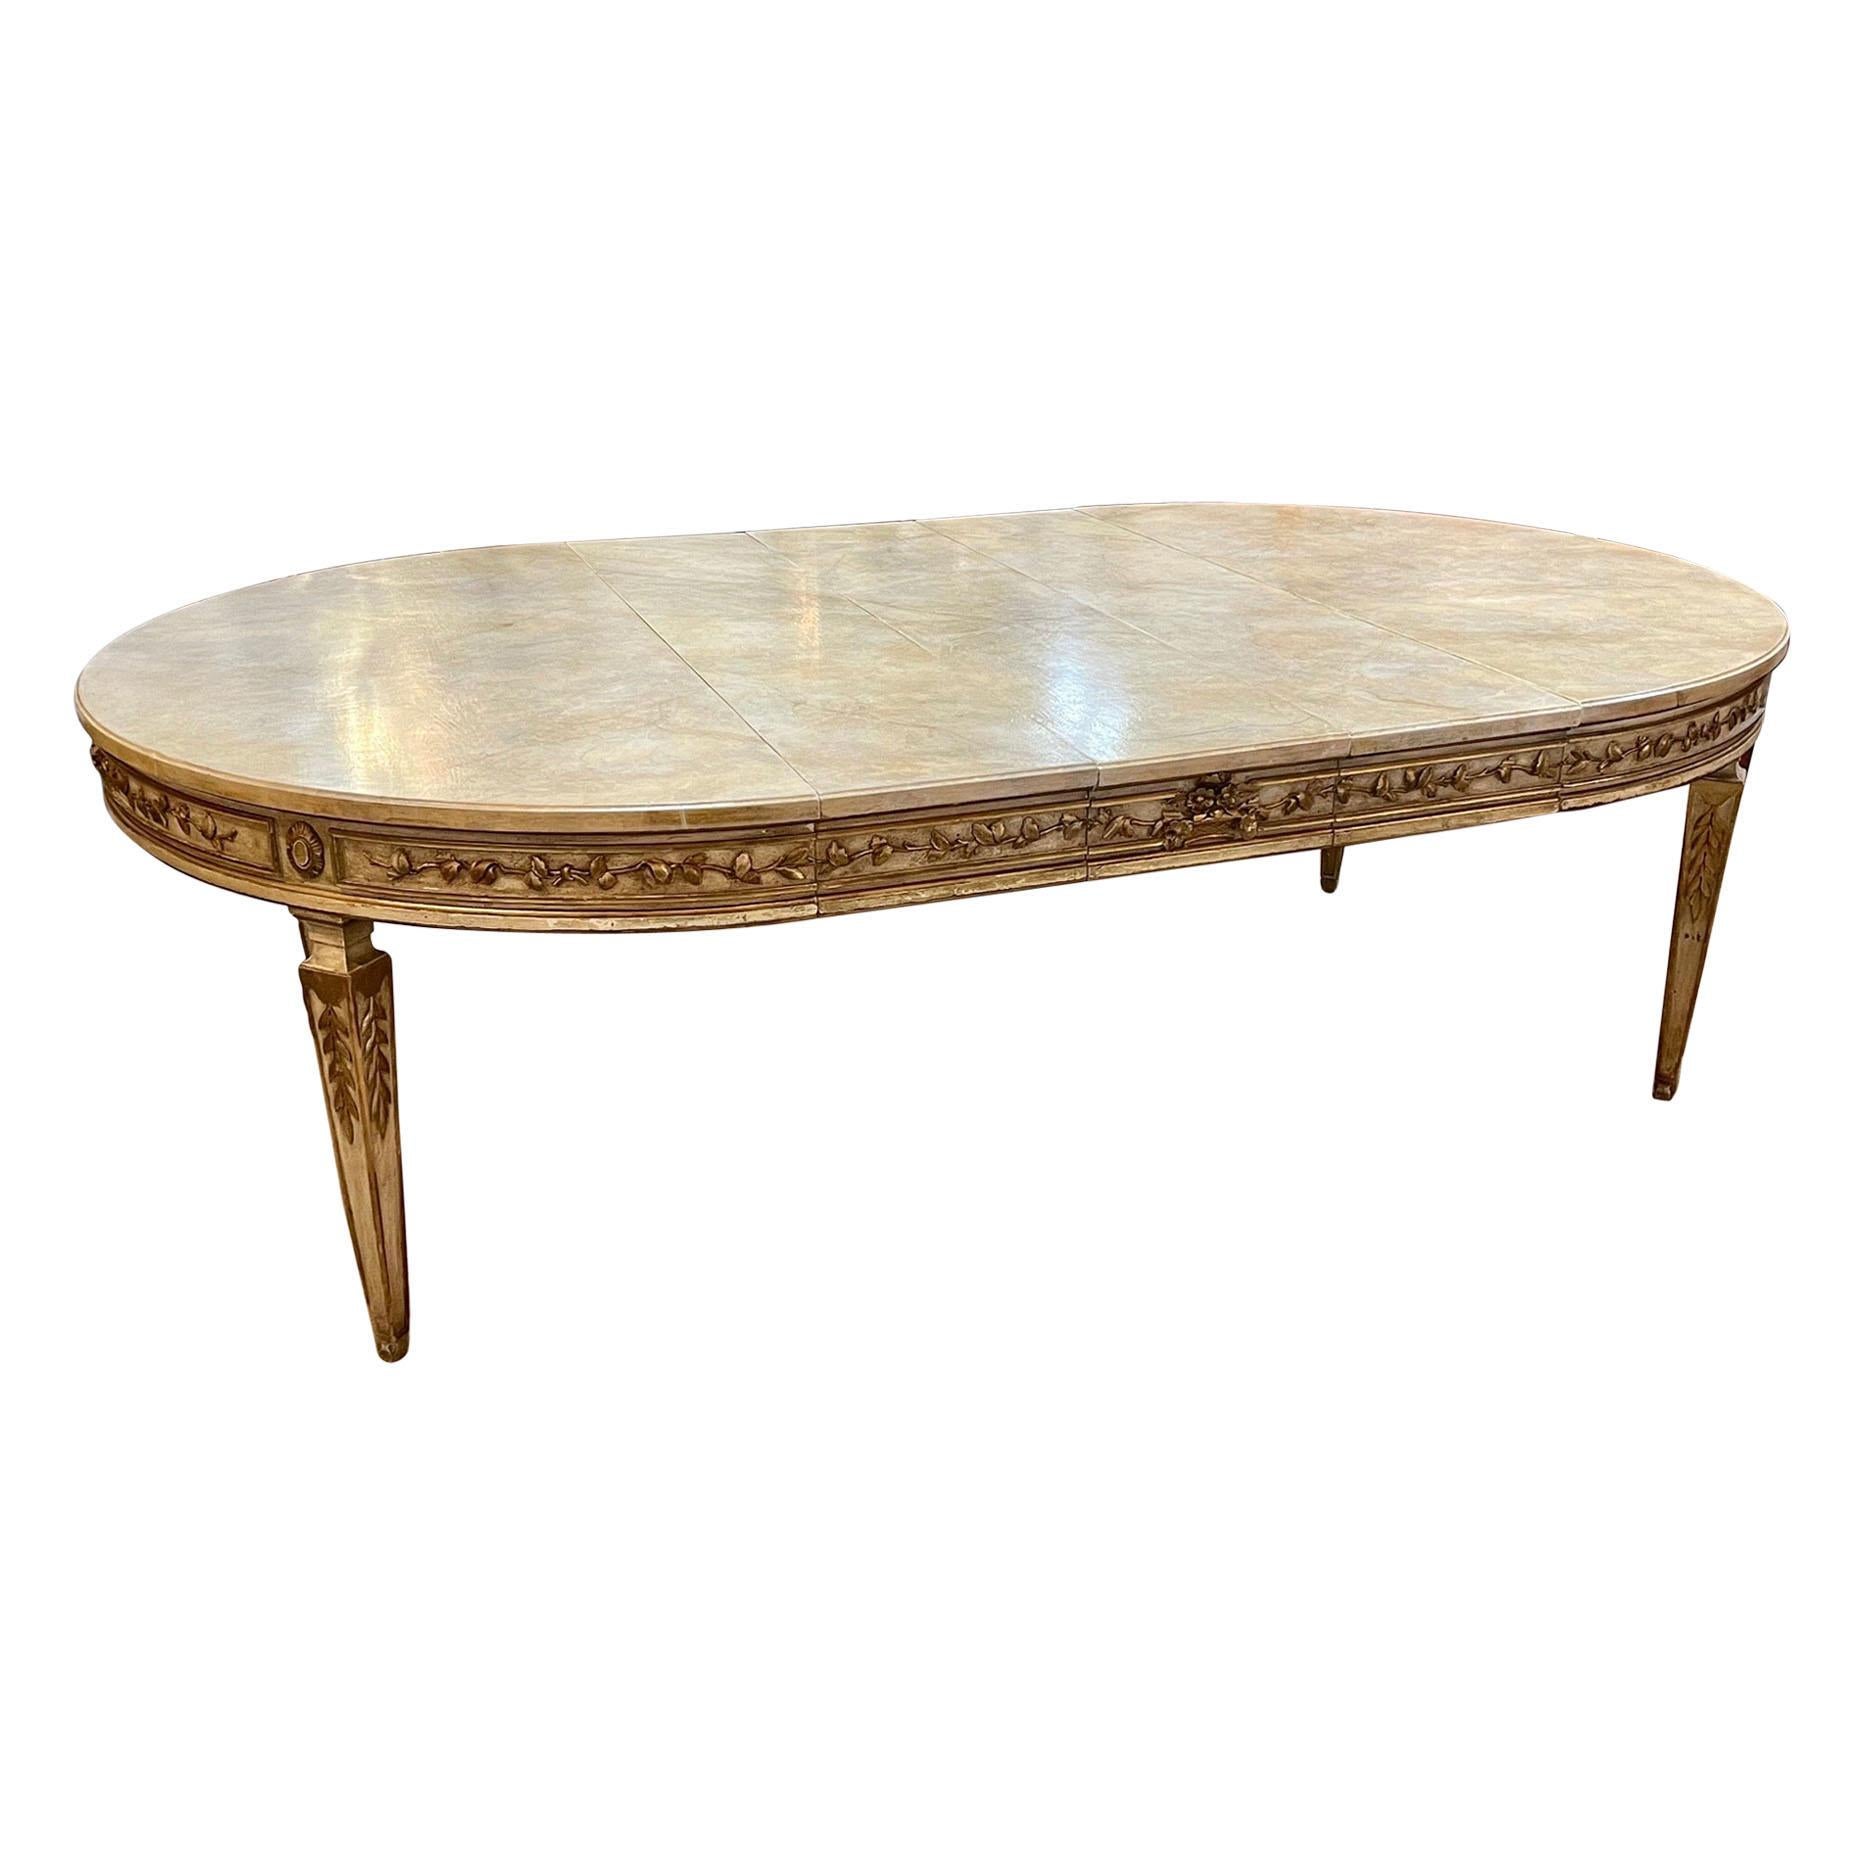 Italian Carved and Parcel Gilt Neoclassical Dining Table